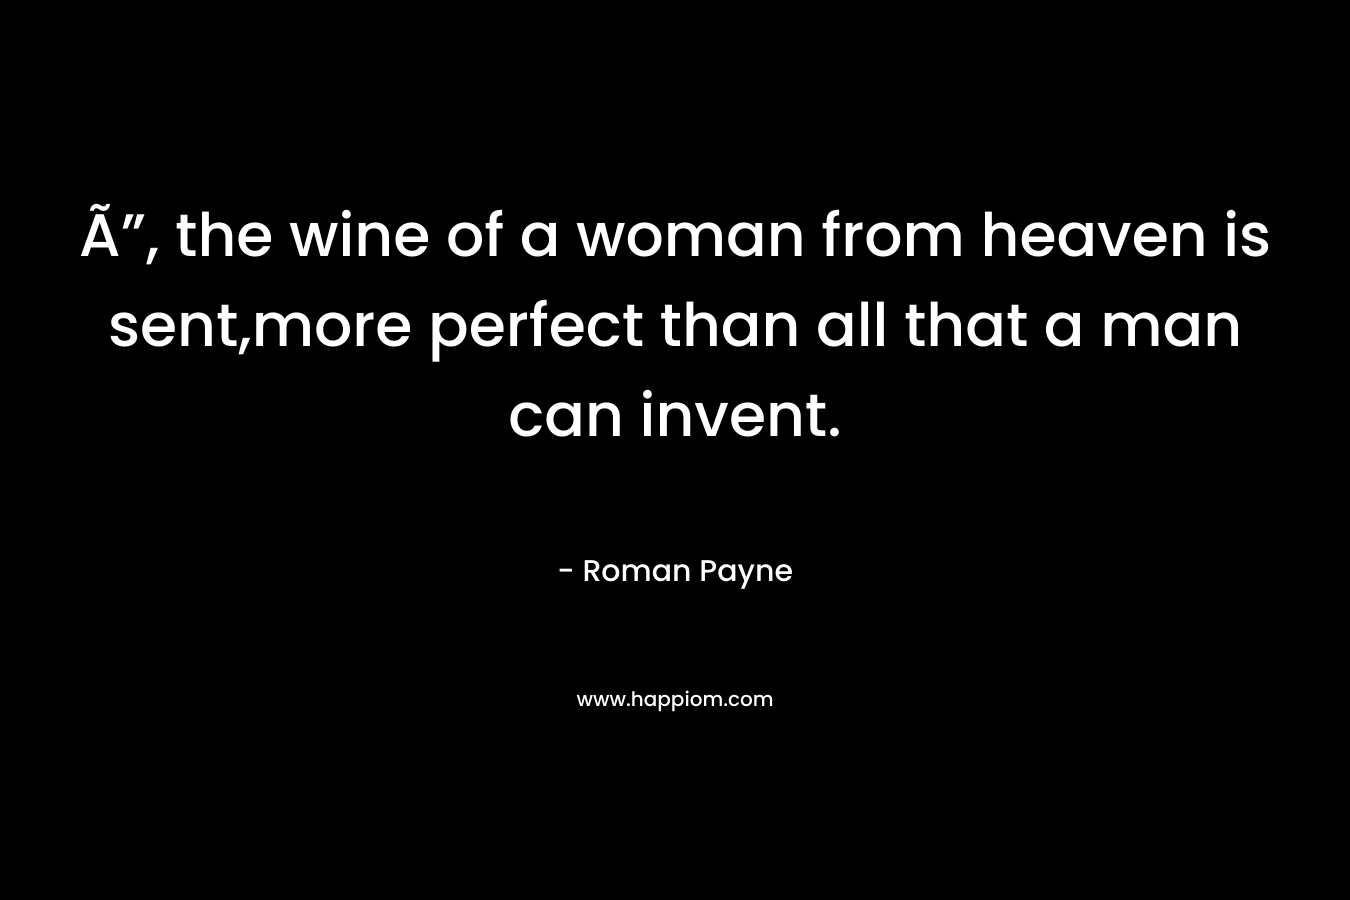 Ã”, the wine of a woman from heaven is sent,more perfect than all that a man can invent.